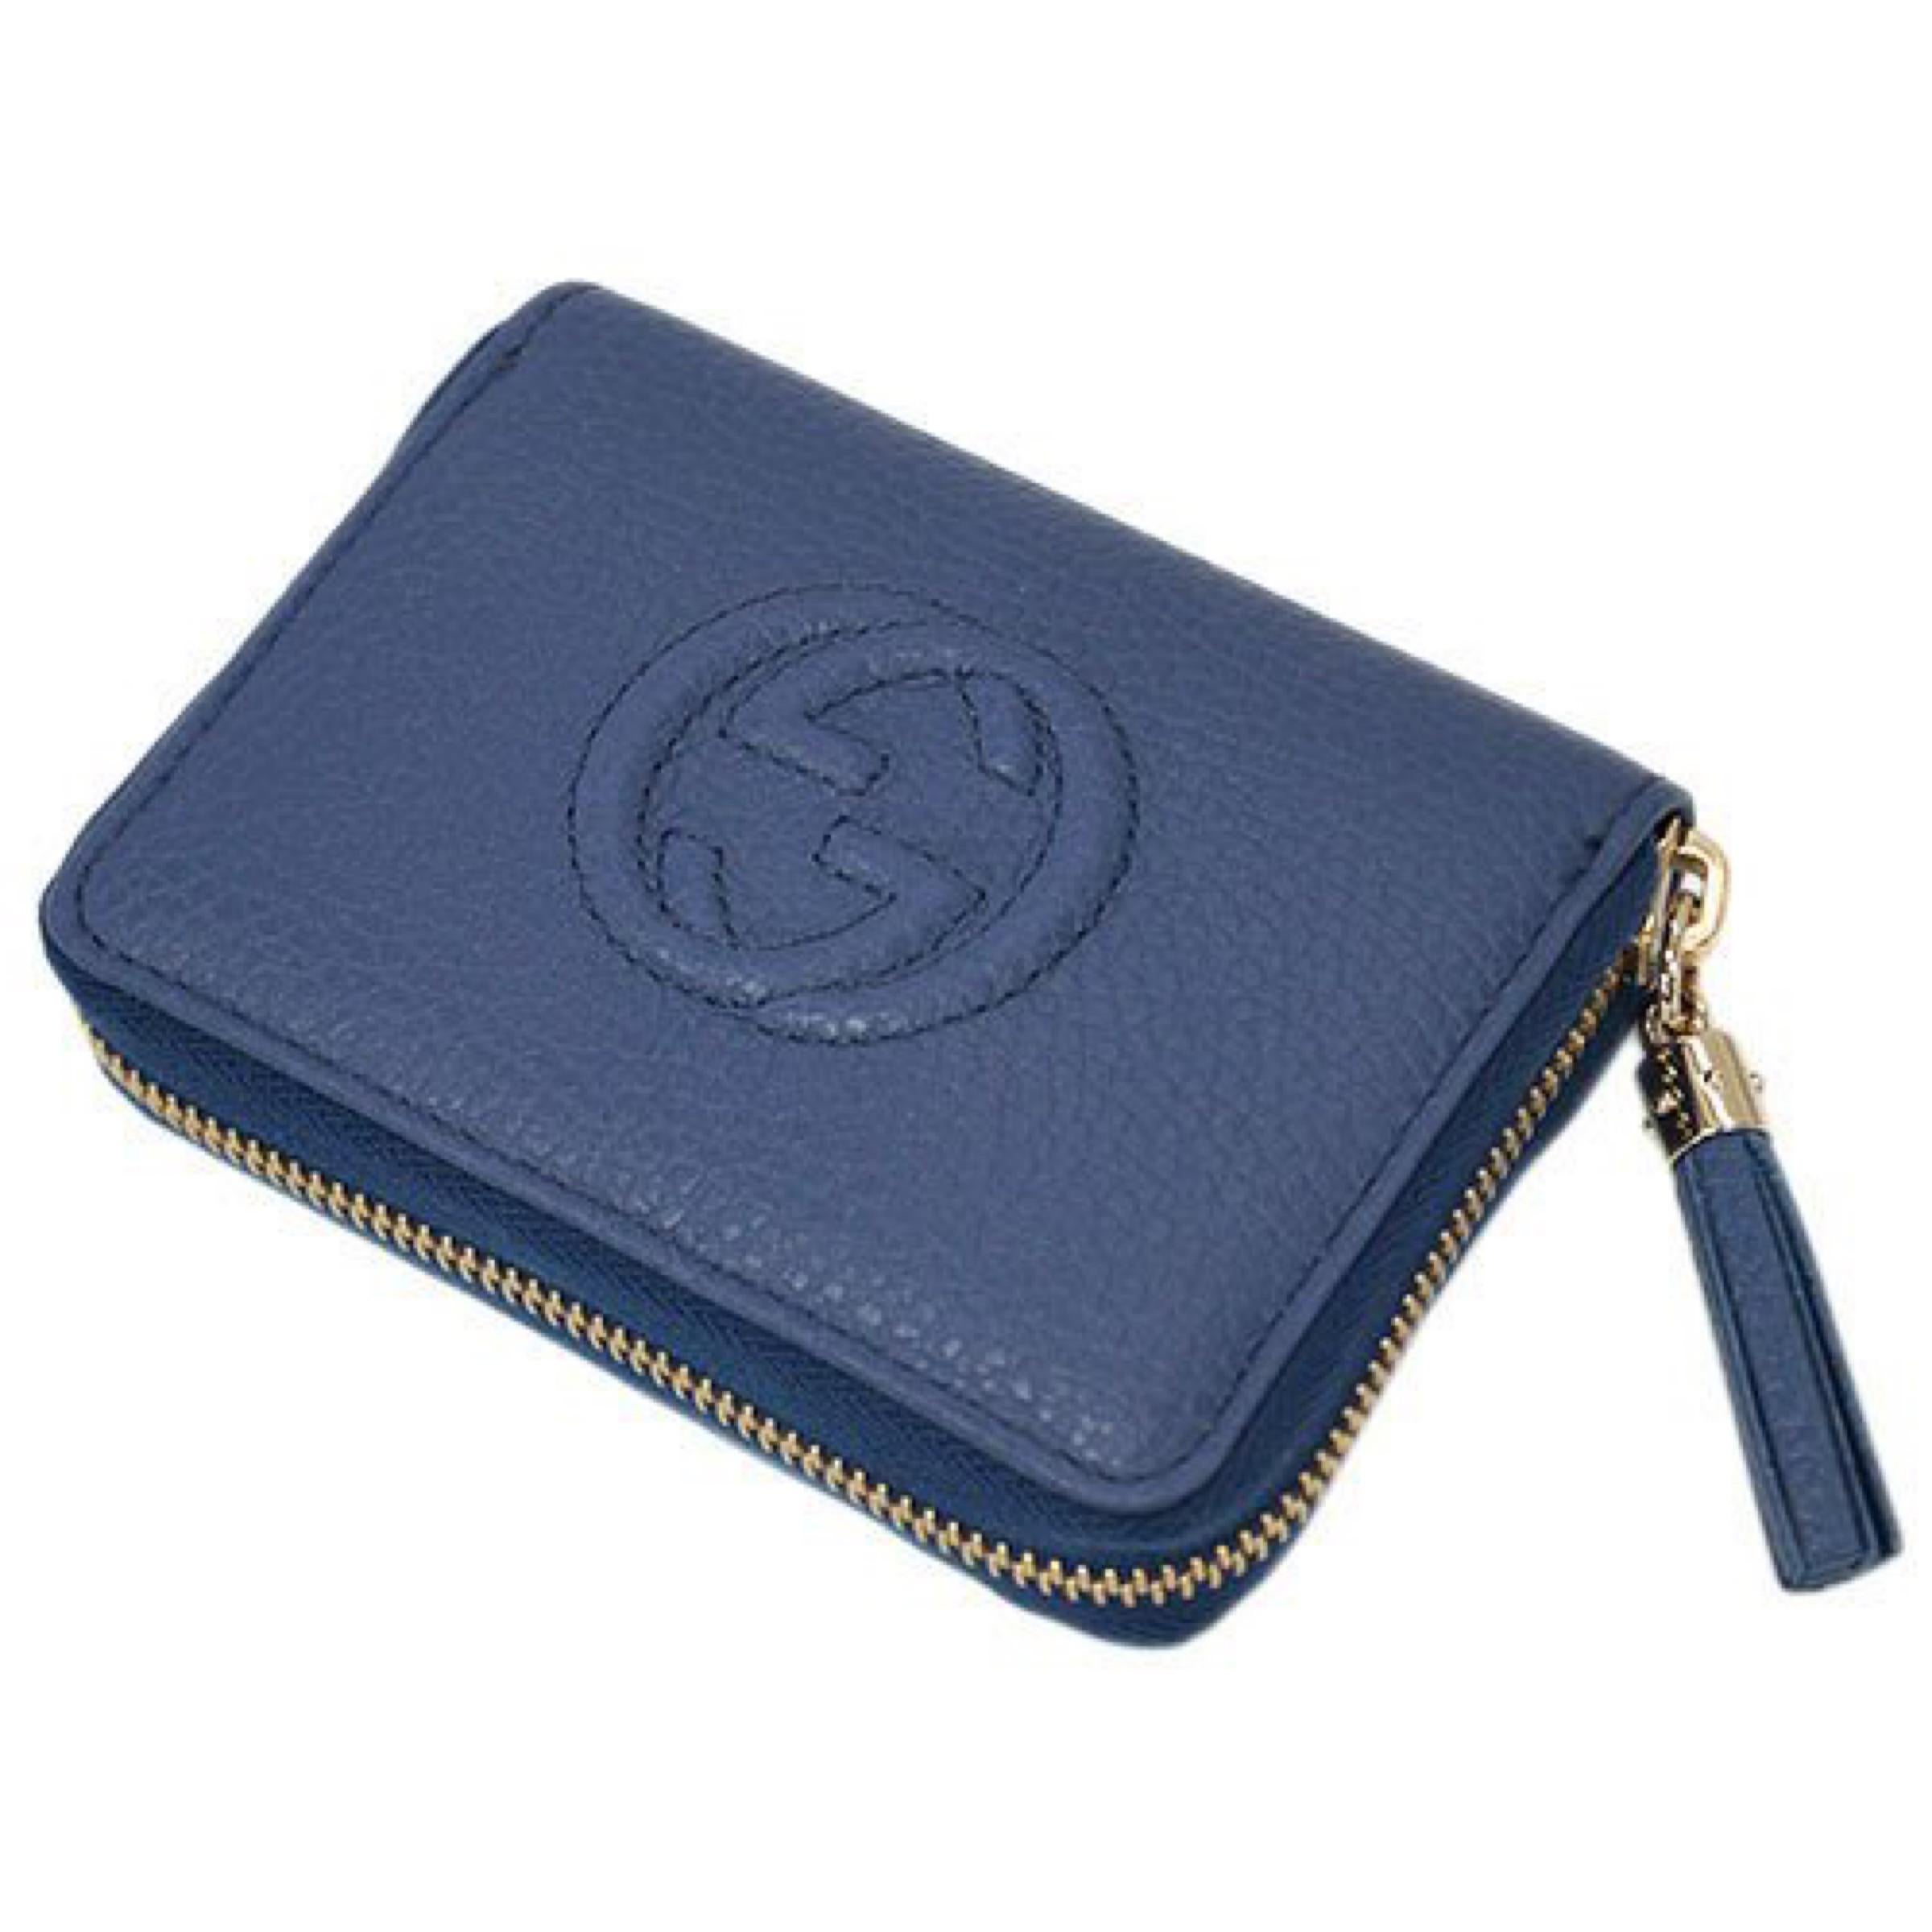 Women's NEW Gucci Blue Soho Small Leather Coin Purse Wallet For Sale